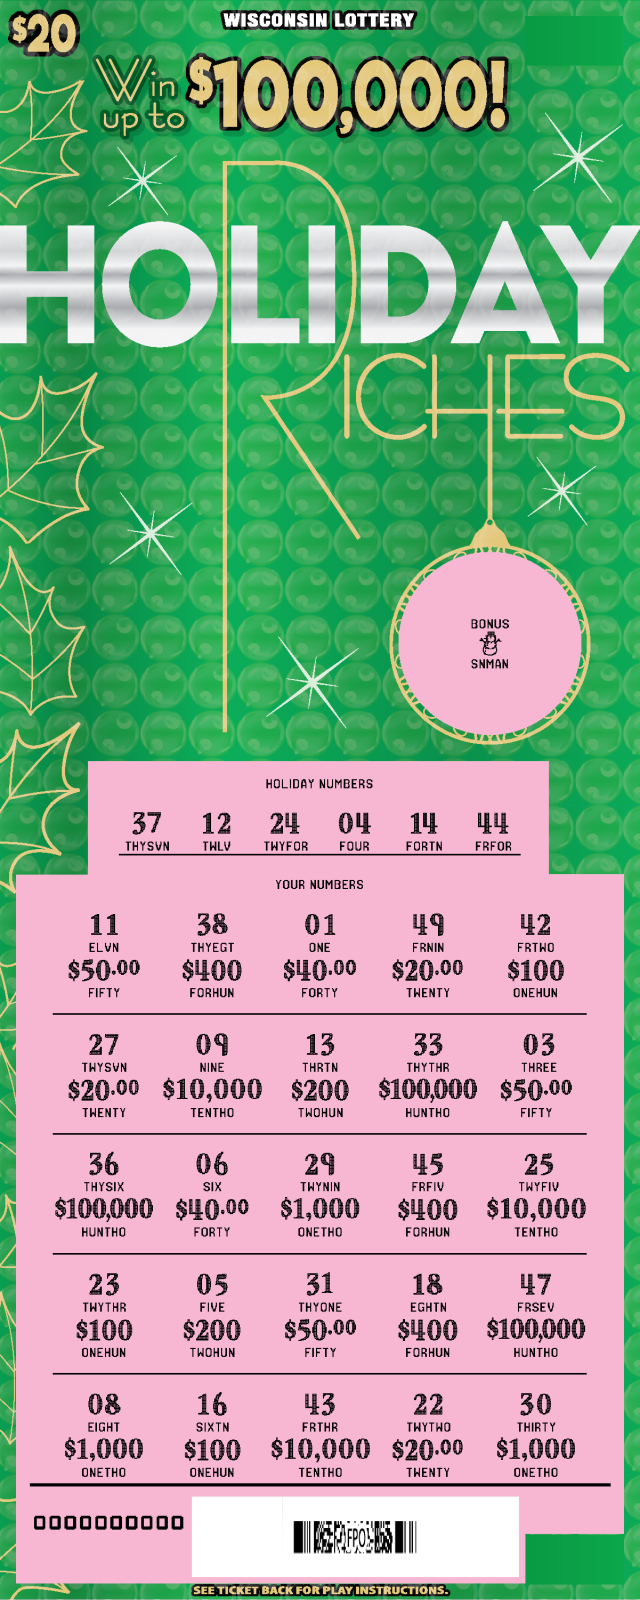 WI Scratch Game, Holiday Riches green background with gold snowflakes and silver and gold text, revealed.